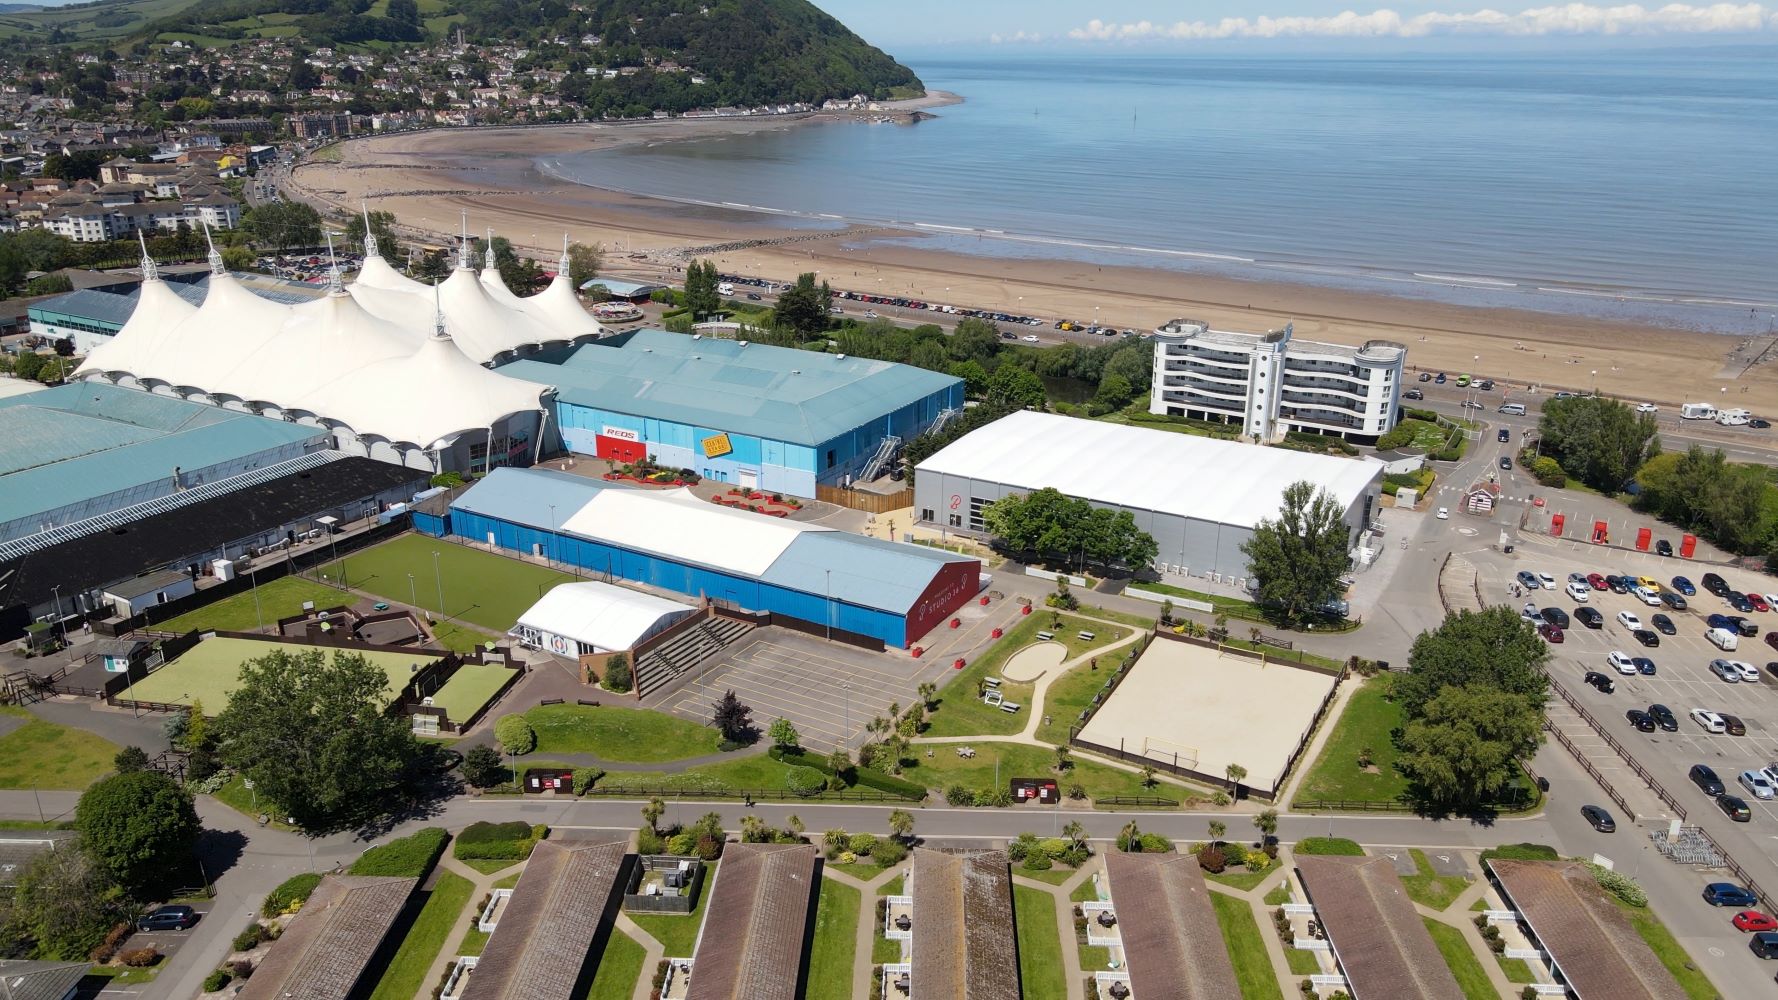 Butlins-Minehead-conferences-and-events-PA-Life-Club-meet-up